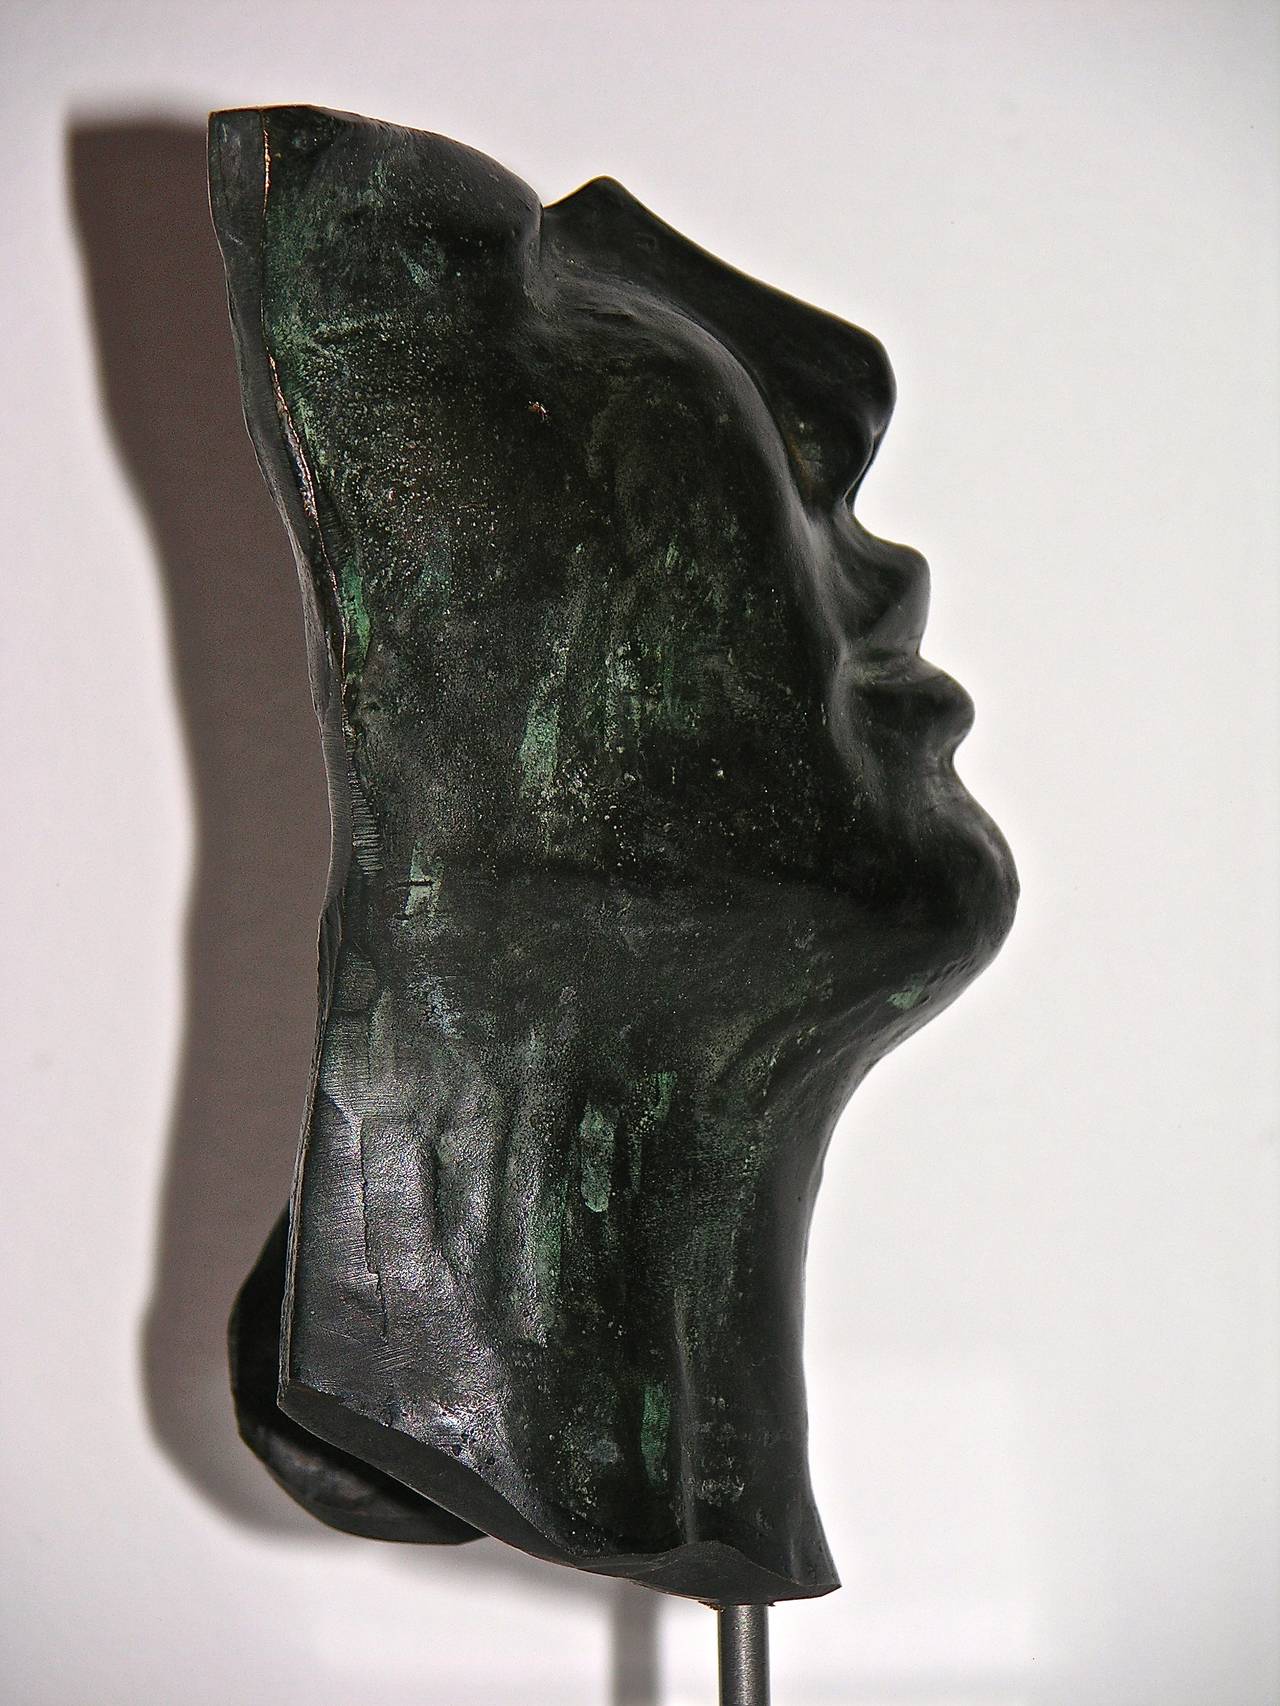 Hollow Face, Italian Black Bronze Sculpture on Lucite Base by Ginestroni 1